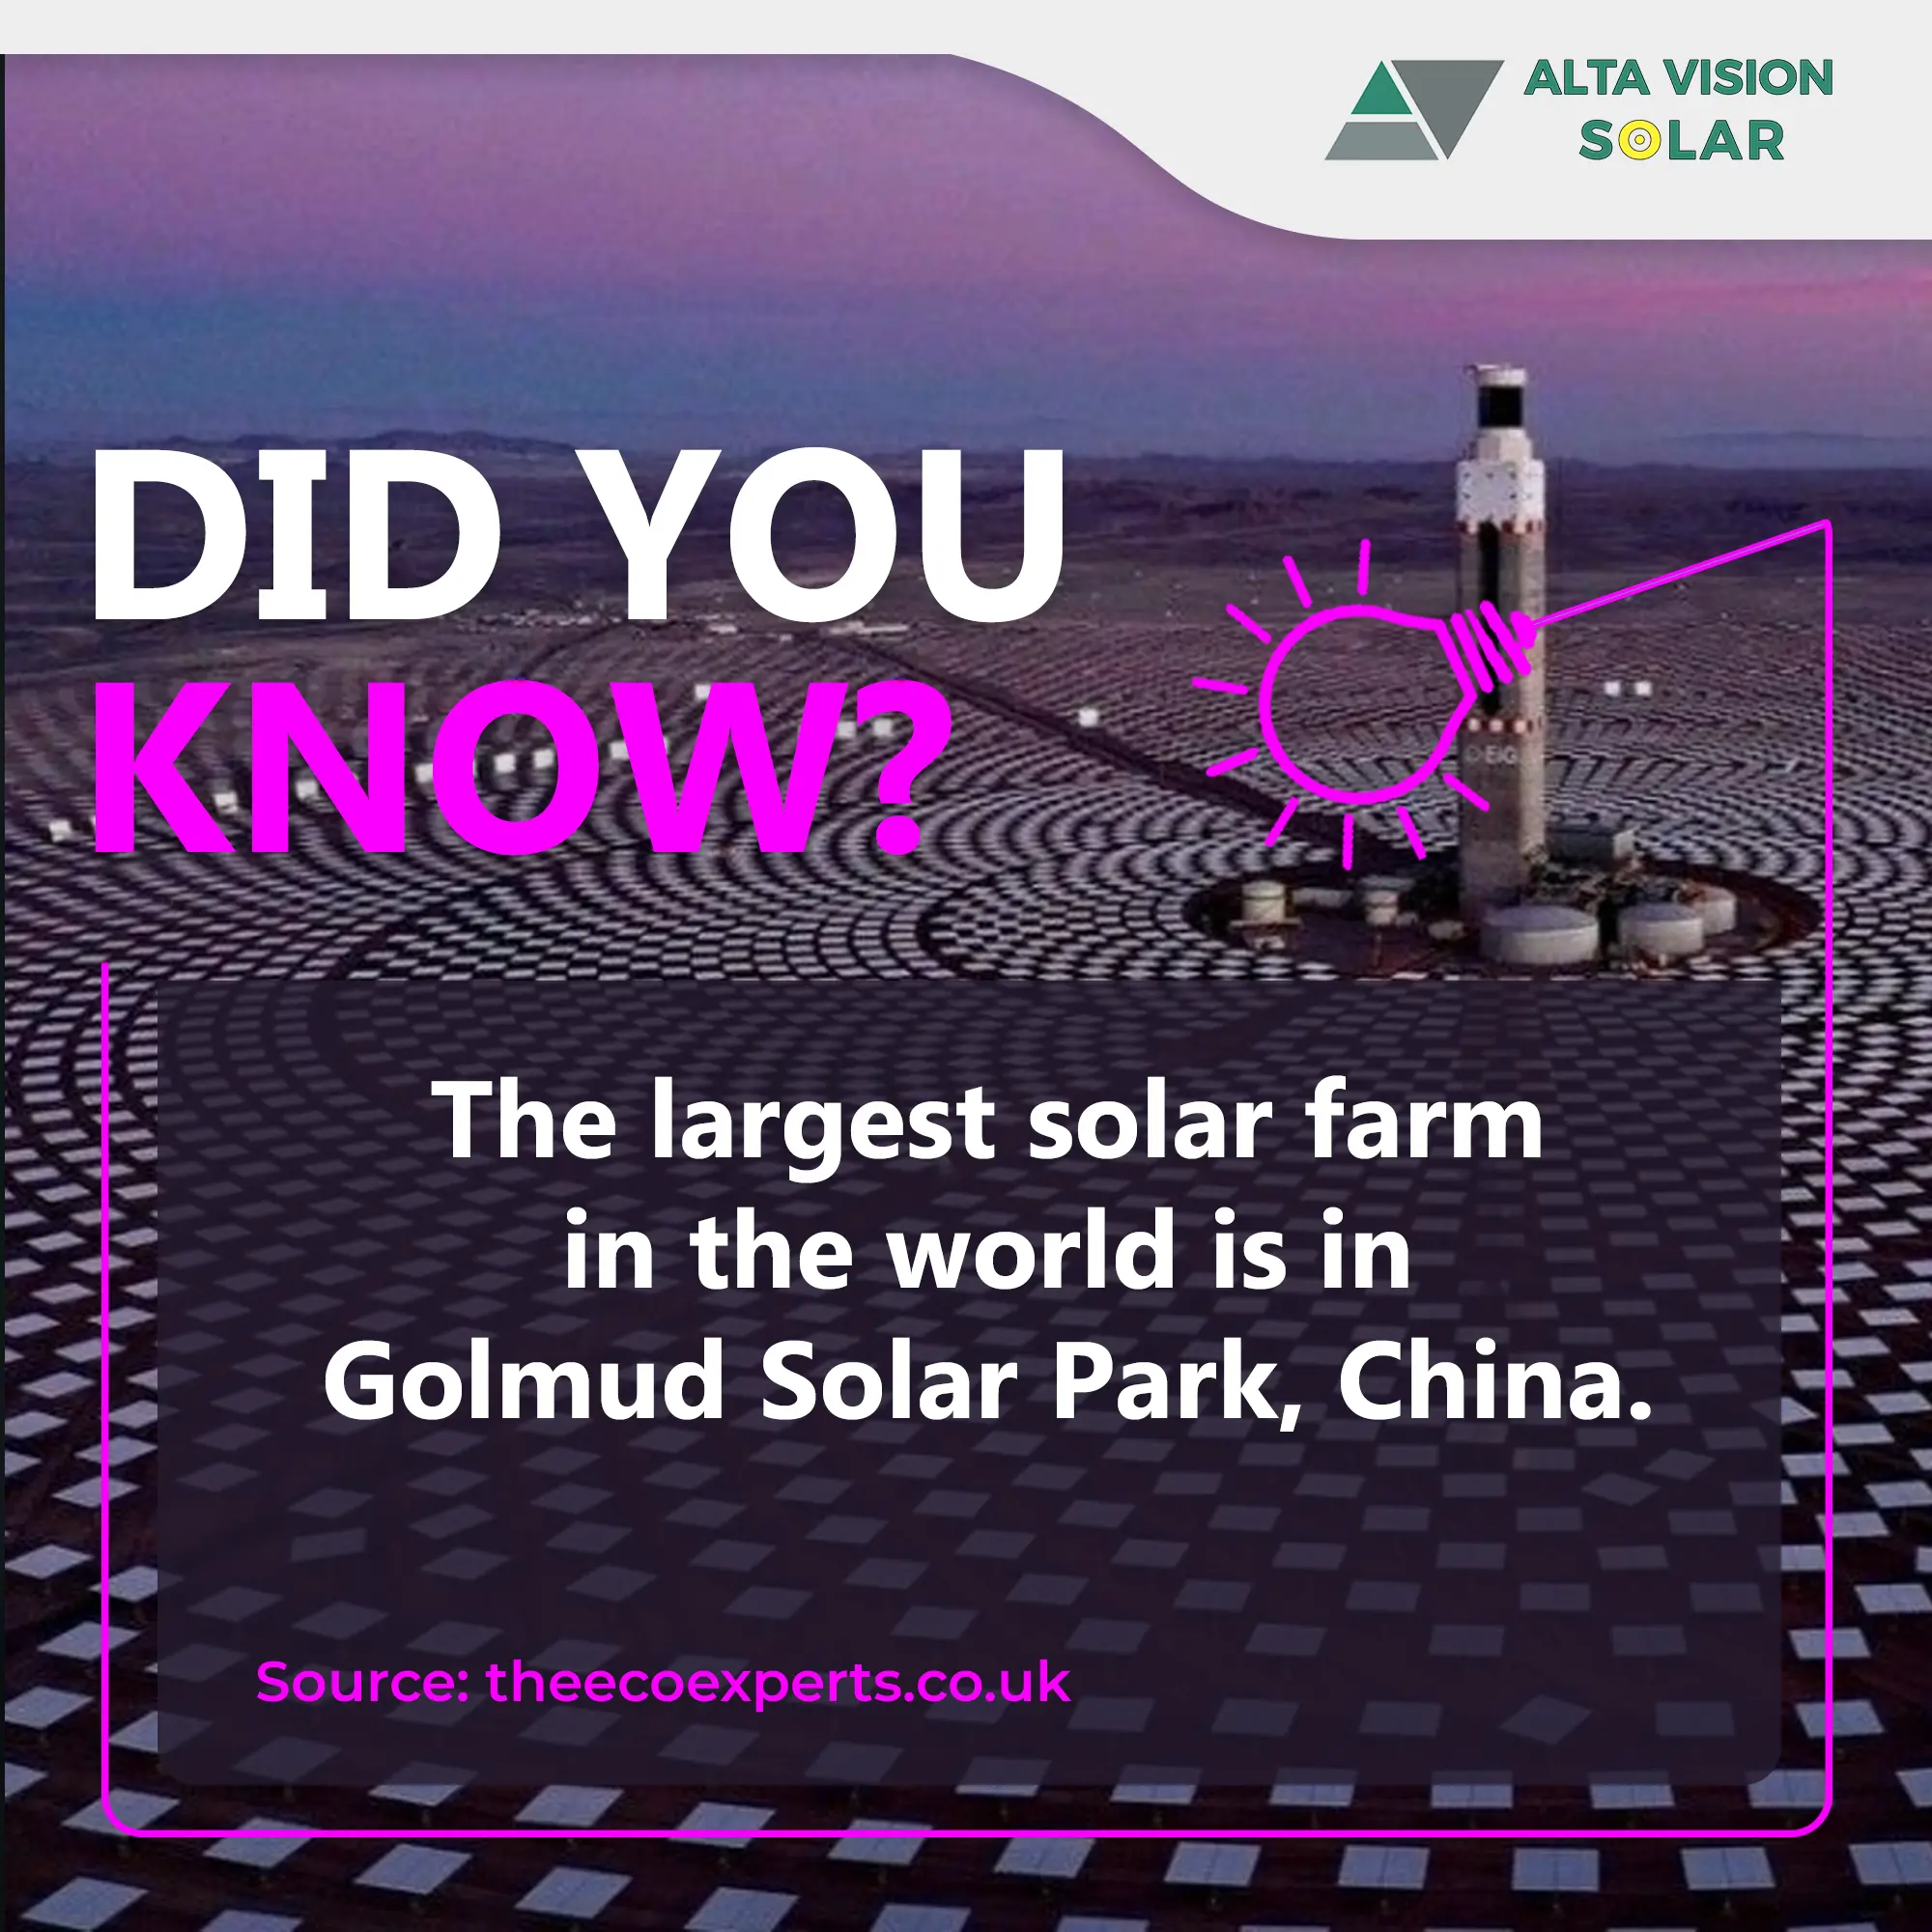 The largest solar farm in the world is in Golmud Solar Park, China